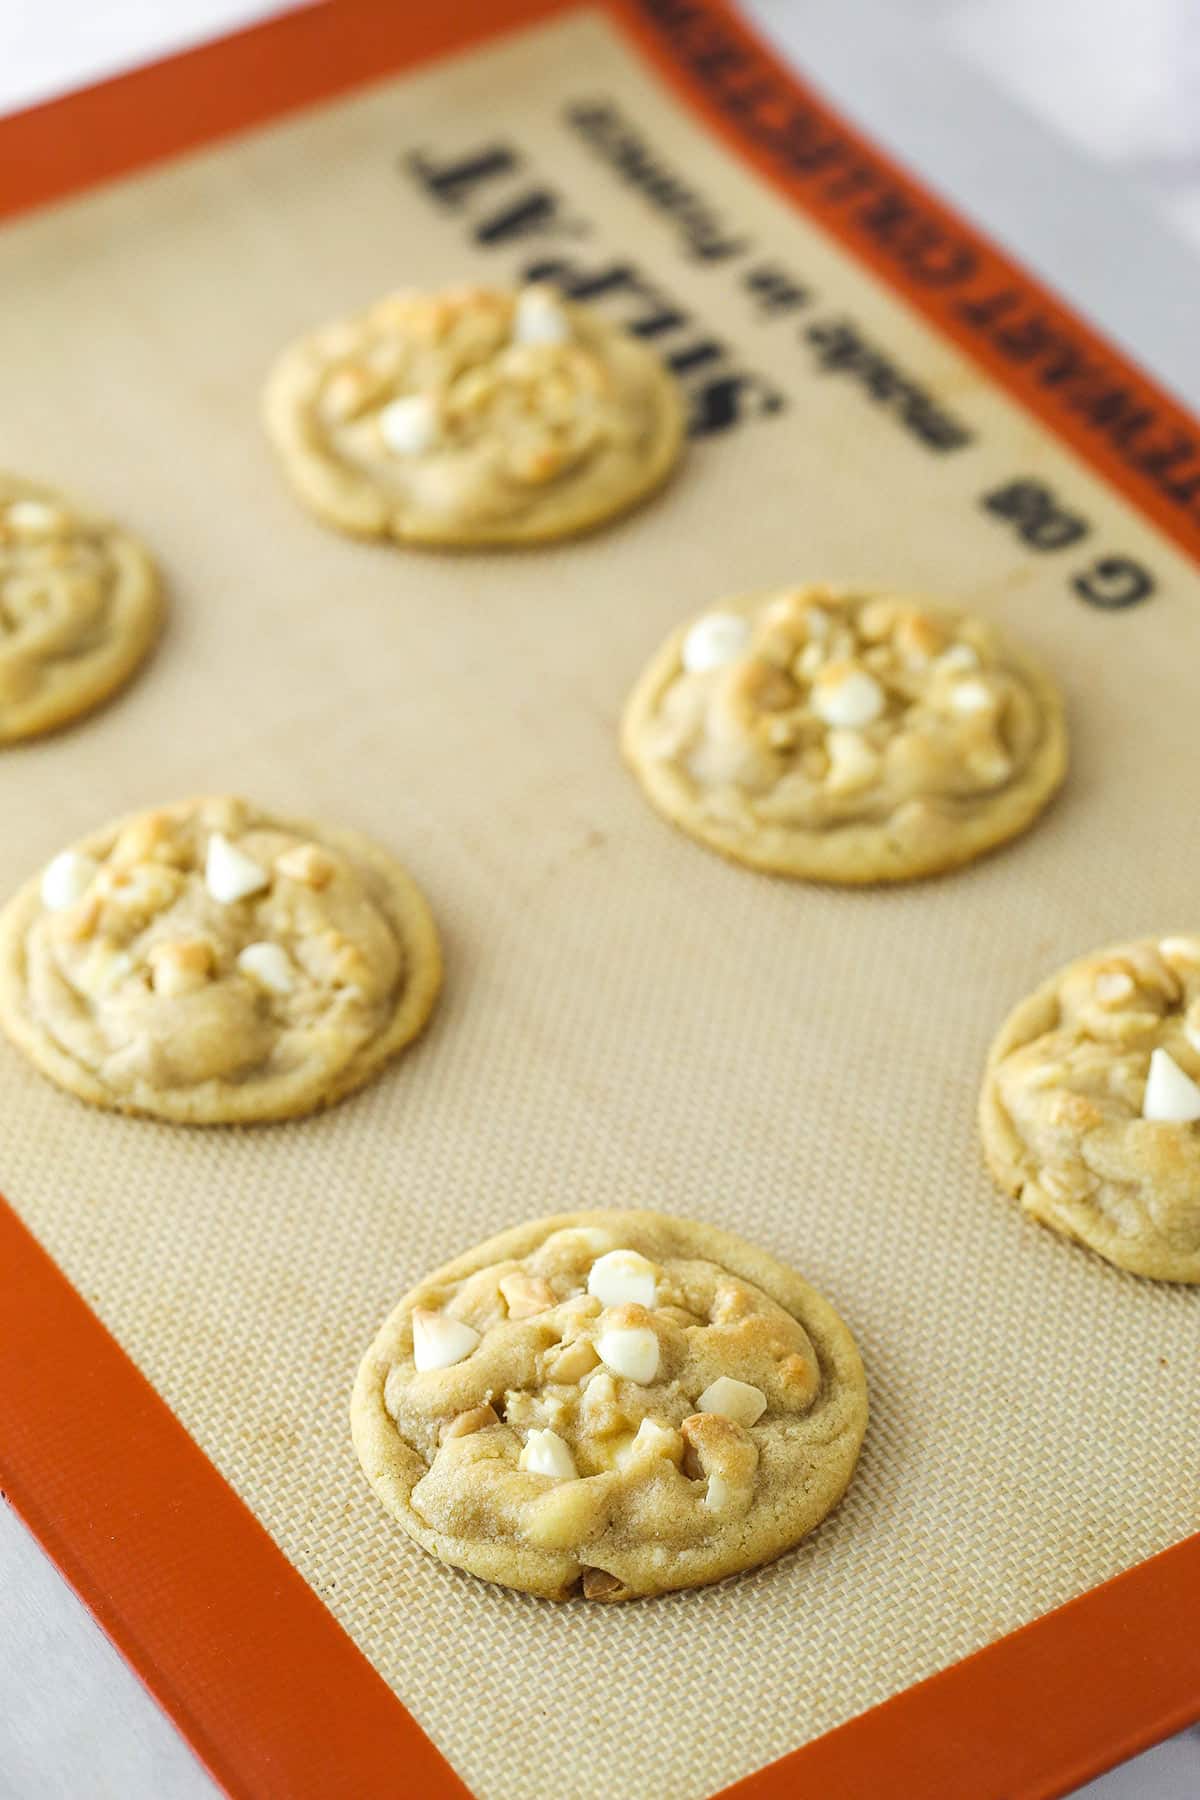 Macadamia nut cookies baked on a silicone mat.